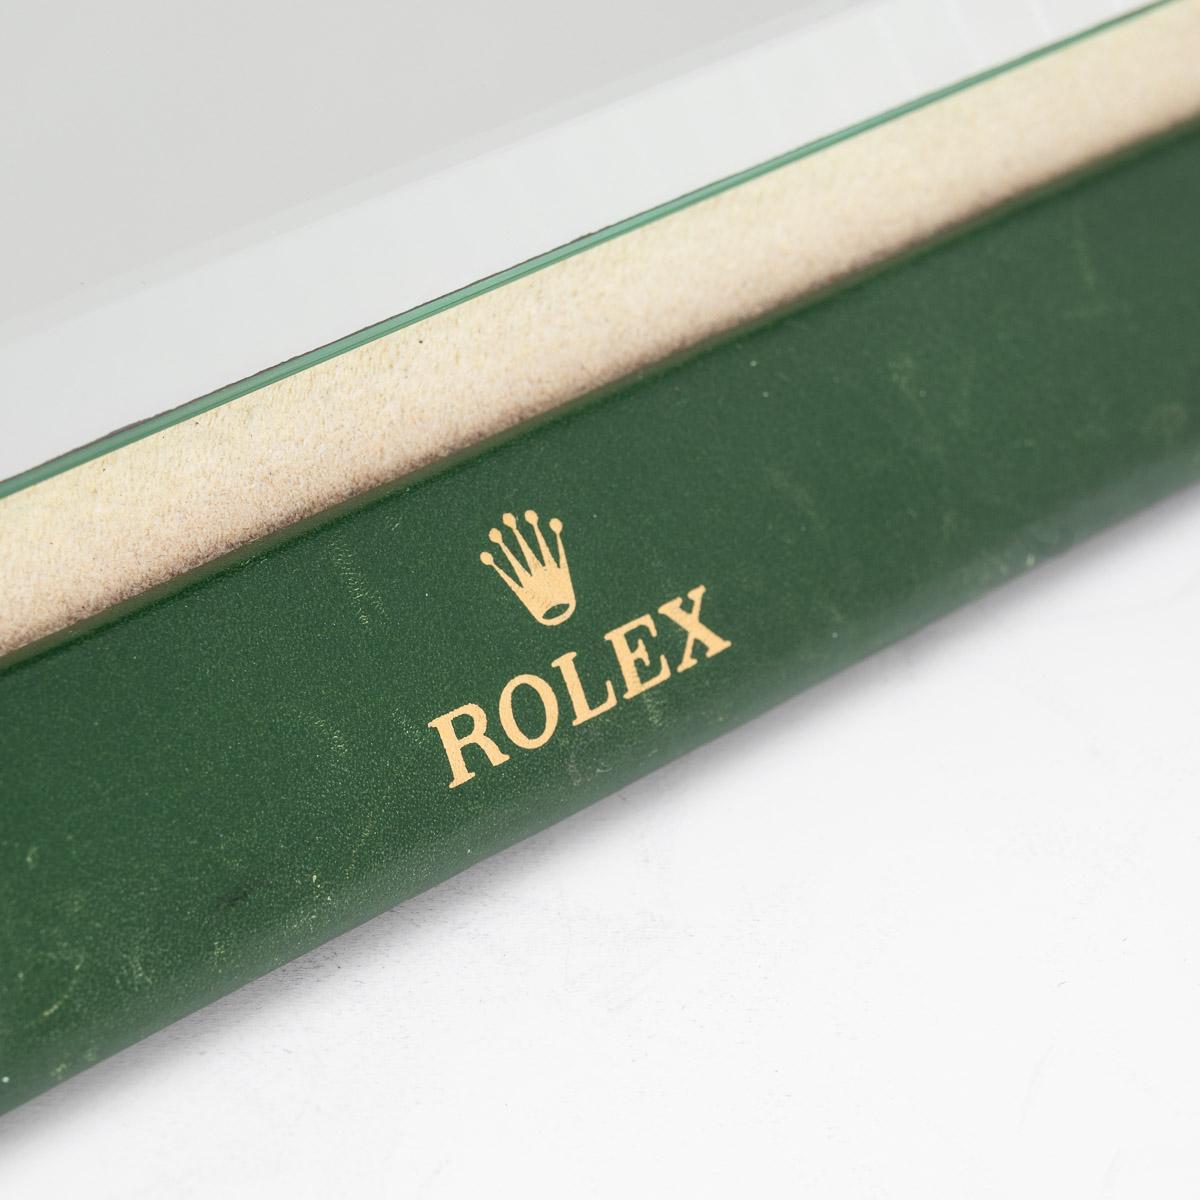 20th Century Rolex Green Leather Bound Display Mirror For Sale 2